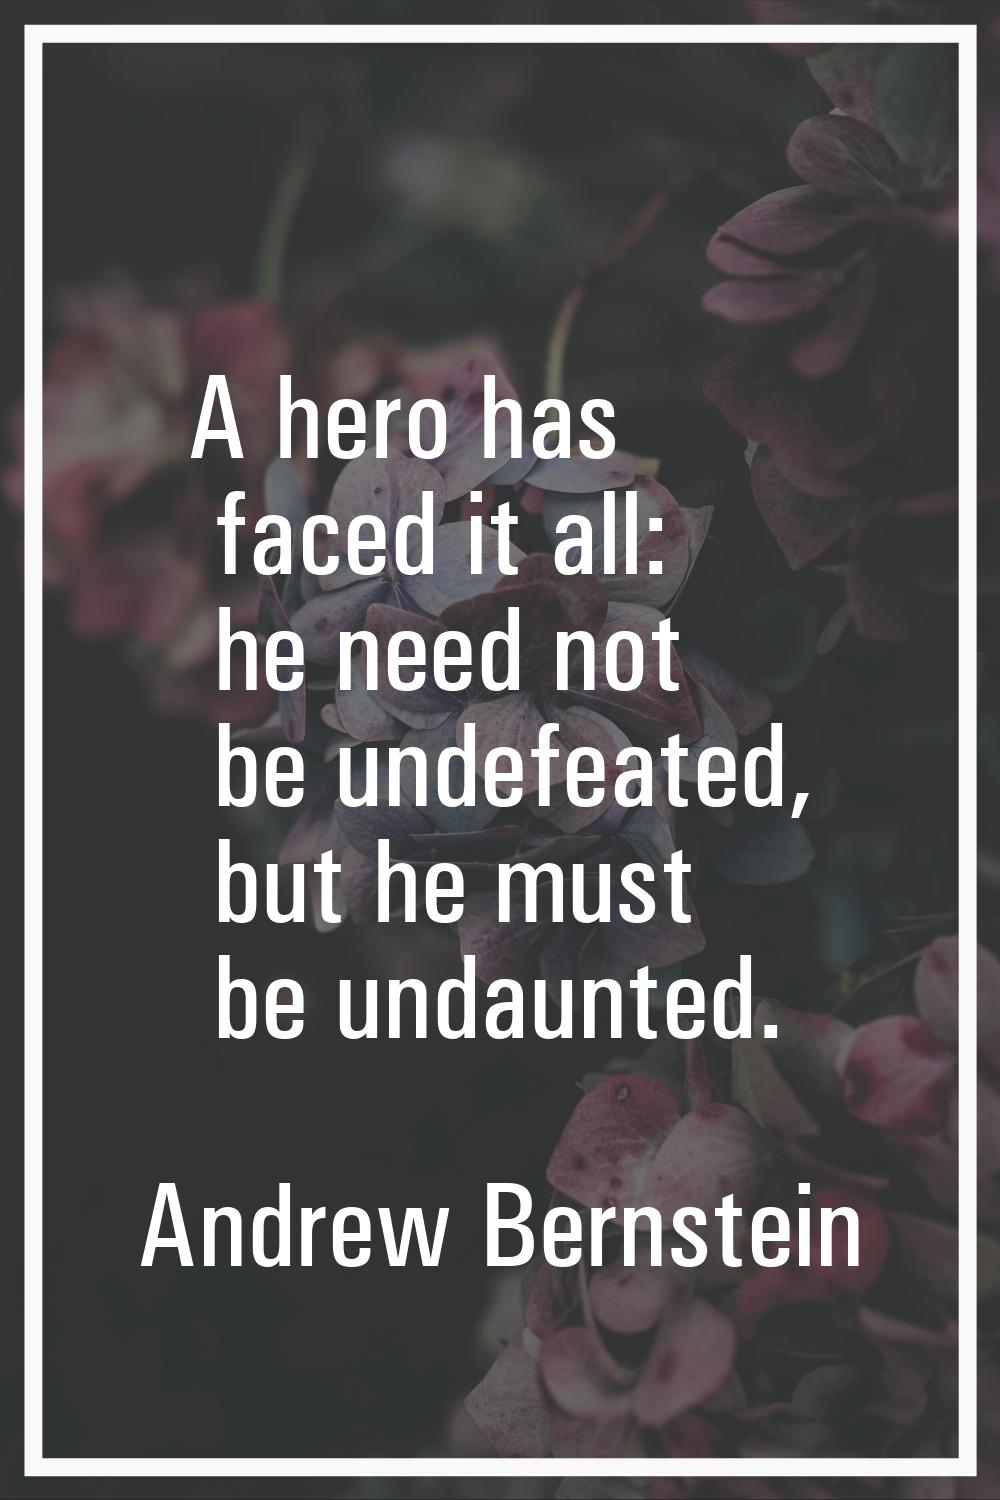 A hero has faced it all: he need not be undefeated, but he must be undaunted.